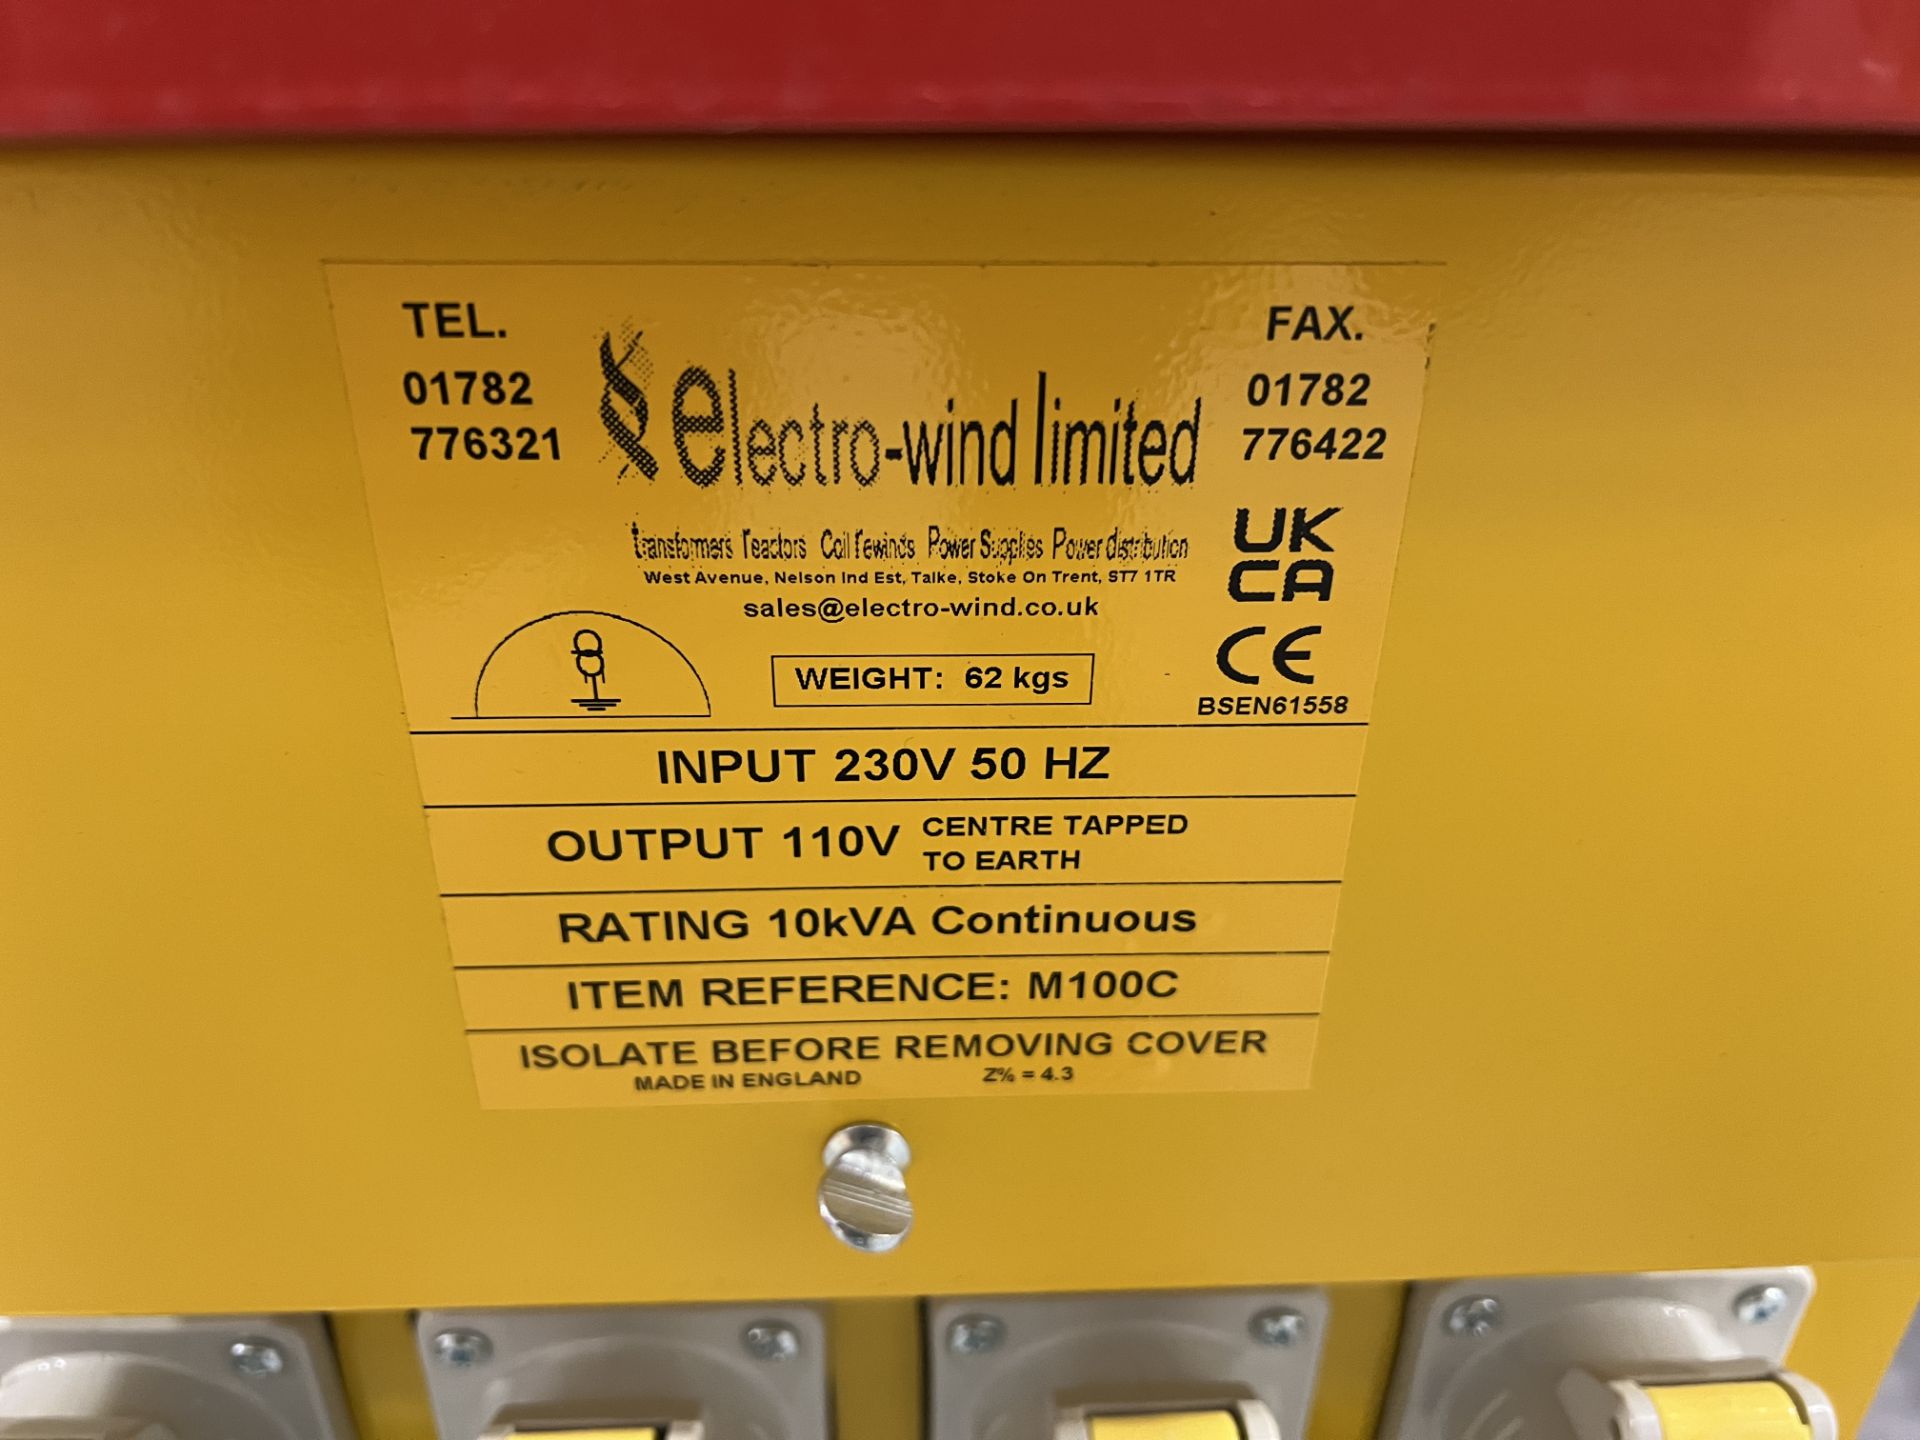 Electro-wind limited M100C power stepdown transformer (2022) (Unused), input voltage 240 volts, - Image 3 of 6